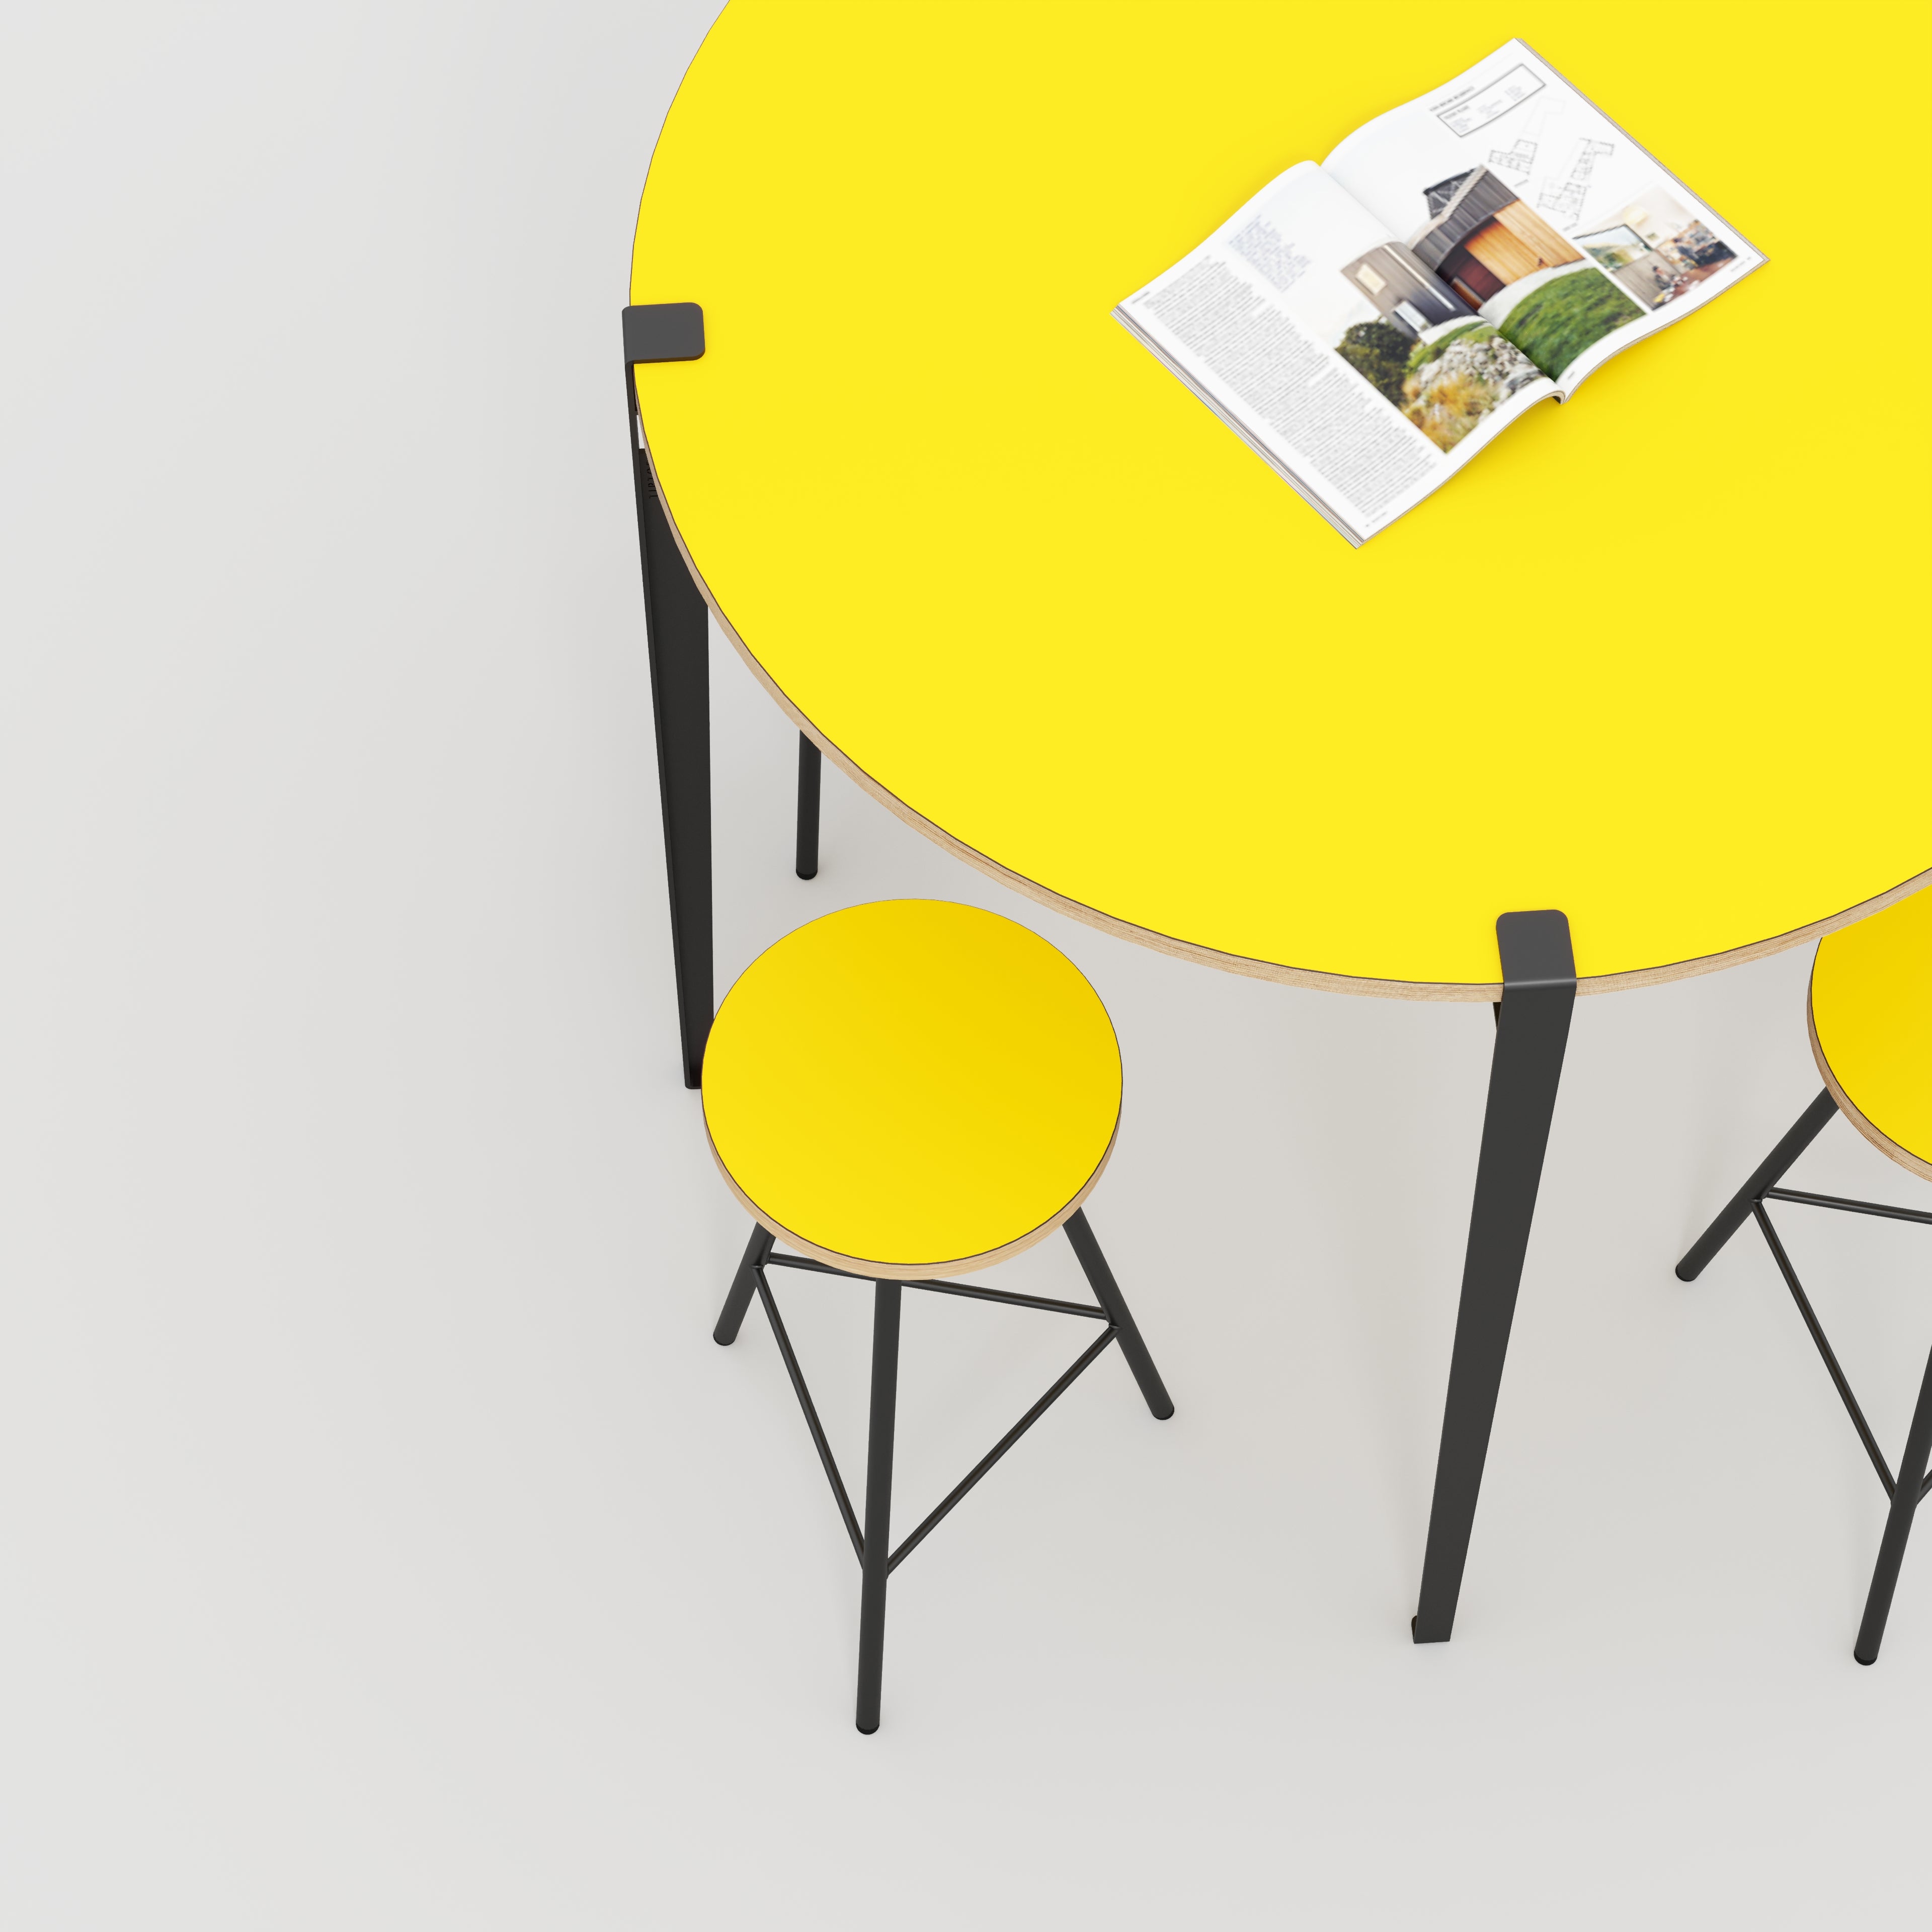 Round Table with Black Tiptoe Legs - Formica Chrome Yellow - 1200(dia) x 1100(h)